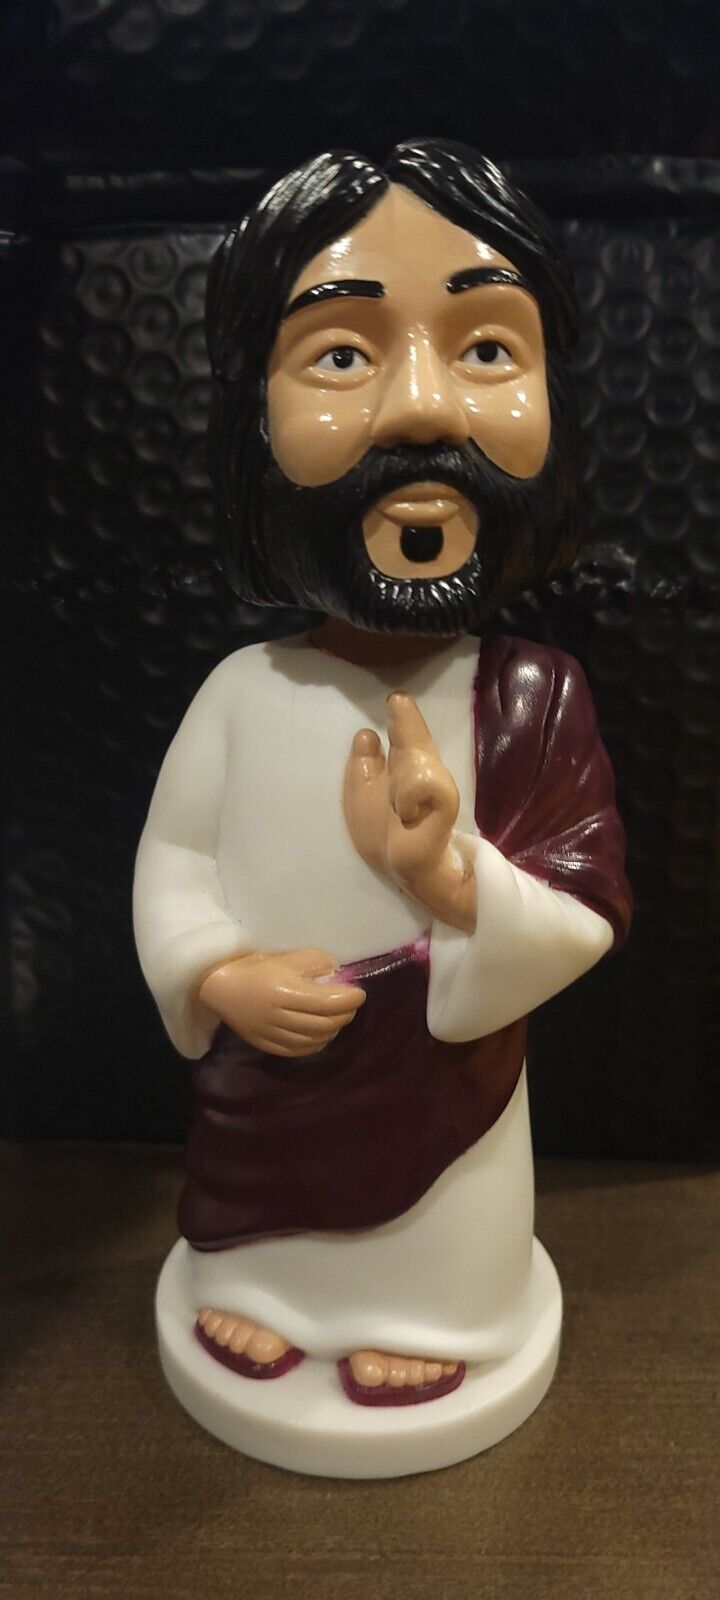 2002 Jesus Nodder 7 inch Bobble Head by Accoutrements